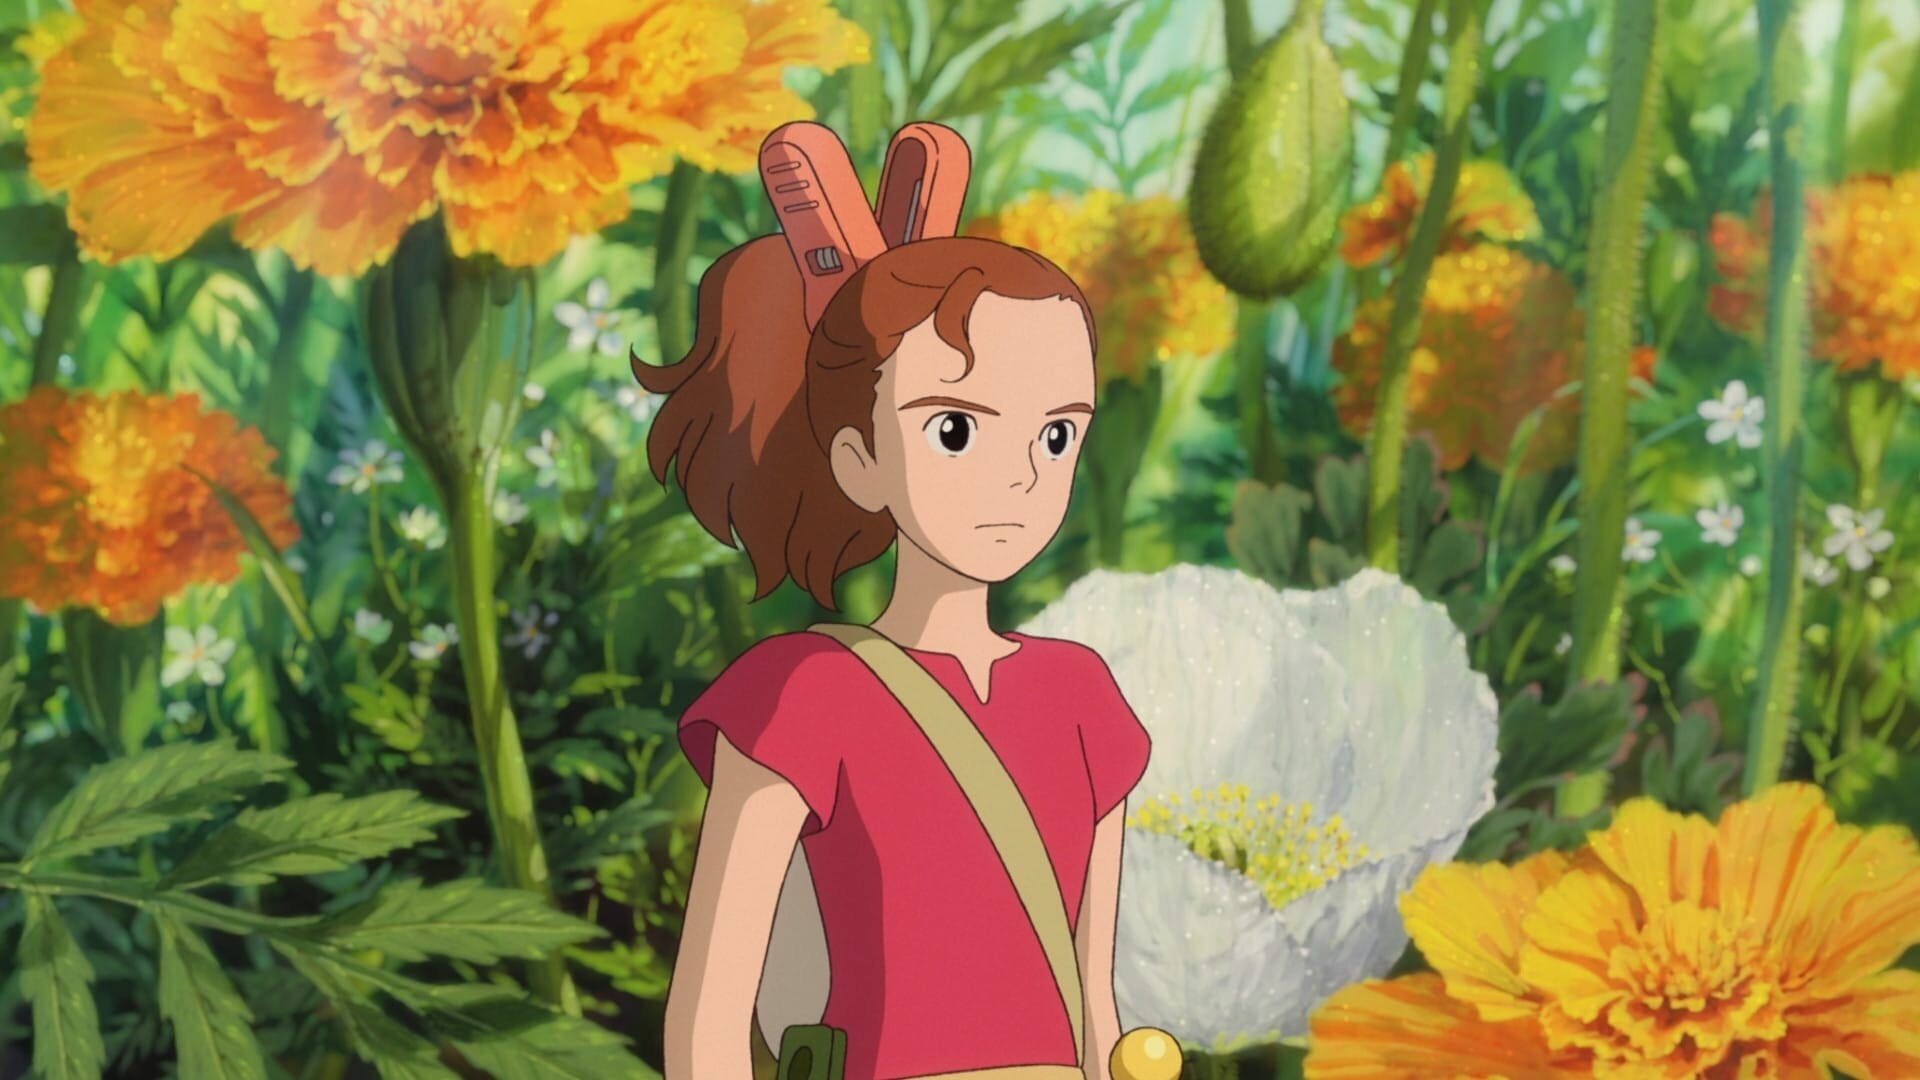 The Secret World of Arrietty: An inches-tall Borrower whose family lives within the walls of a human household. 1920x1080 Full HD Wallpaper.